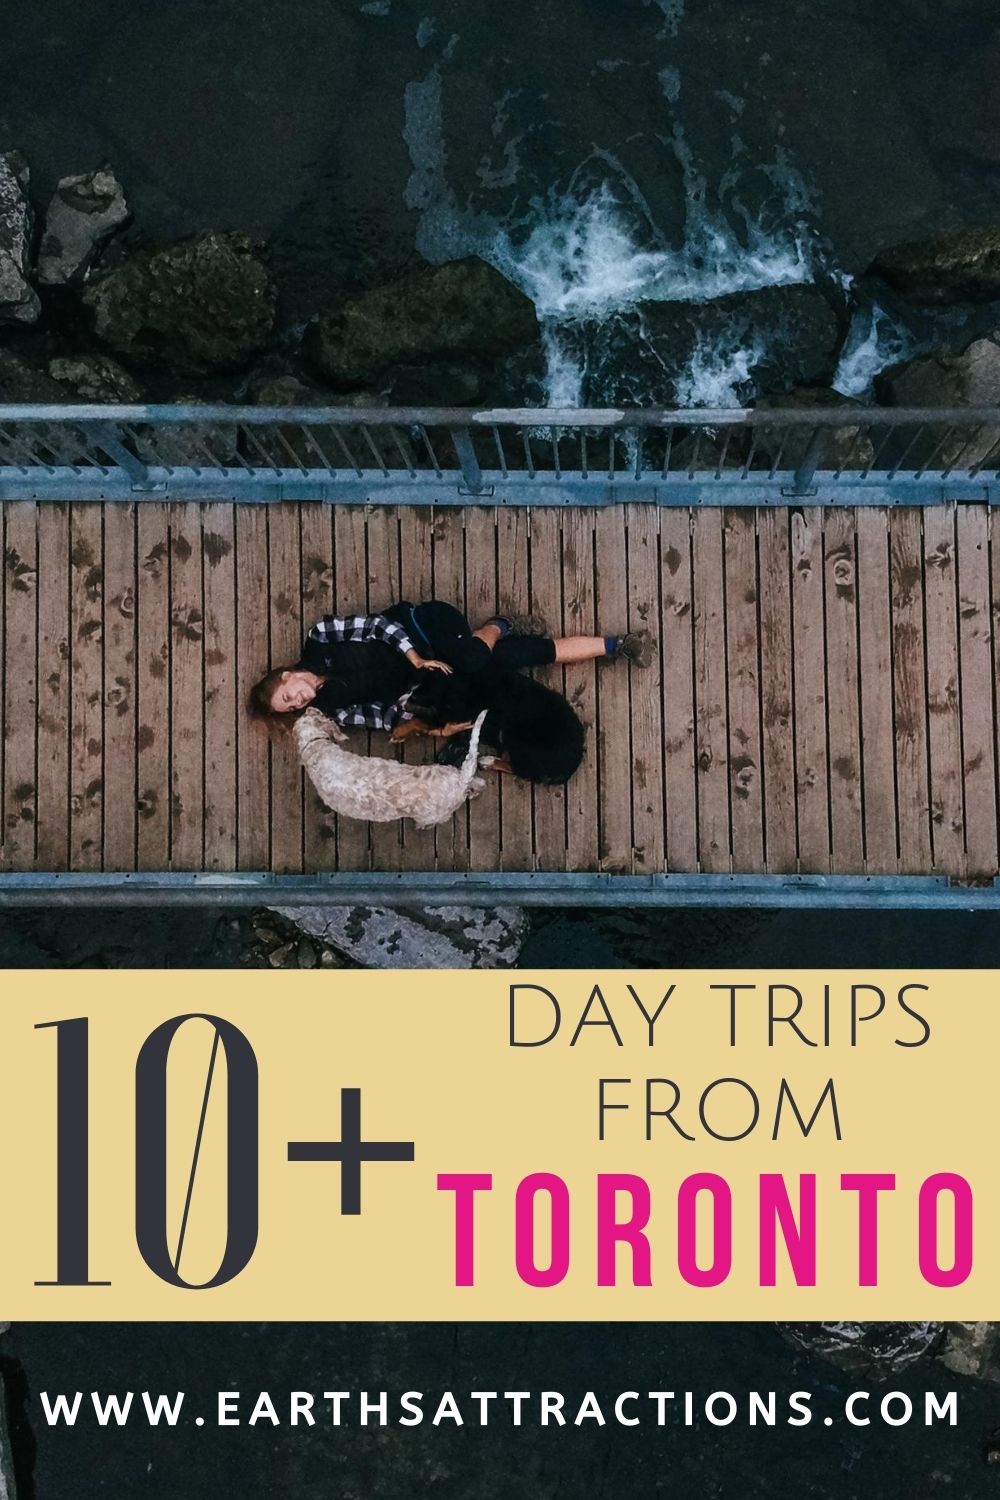 10+ Day trips from Toronto, Canada. Wondering what to do near Toronto? Read this article and discover the best places to visit near Toronto, recommended by a local. Great adventures, wonderful landscapes and relaxation - everything can be found near Toronto. #toronto #torontodaytrips #torontotrips #thingstodoneartoronto #canada #torontotravel #canadatravel #northamerica #earthsattractions #traveltips #traveldestinations